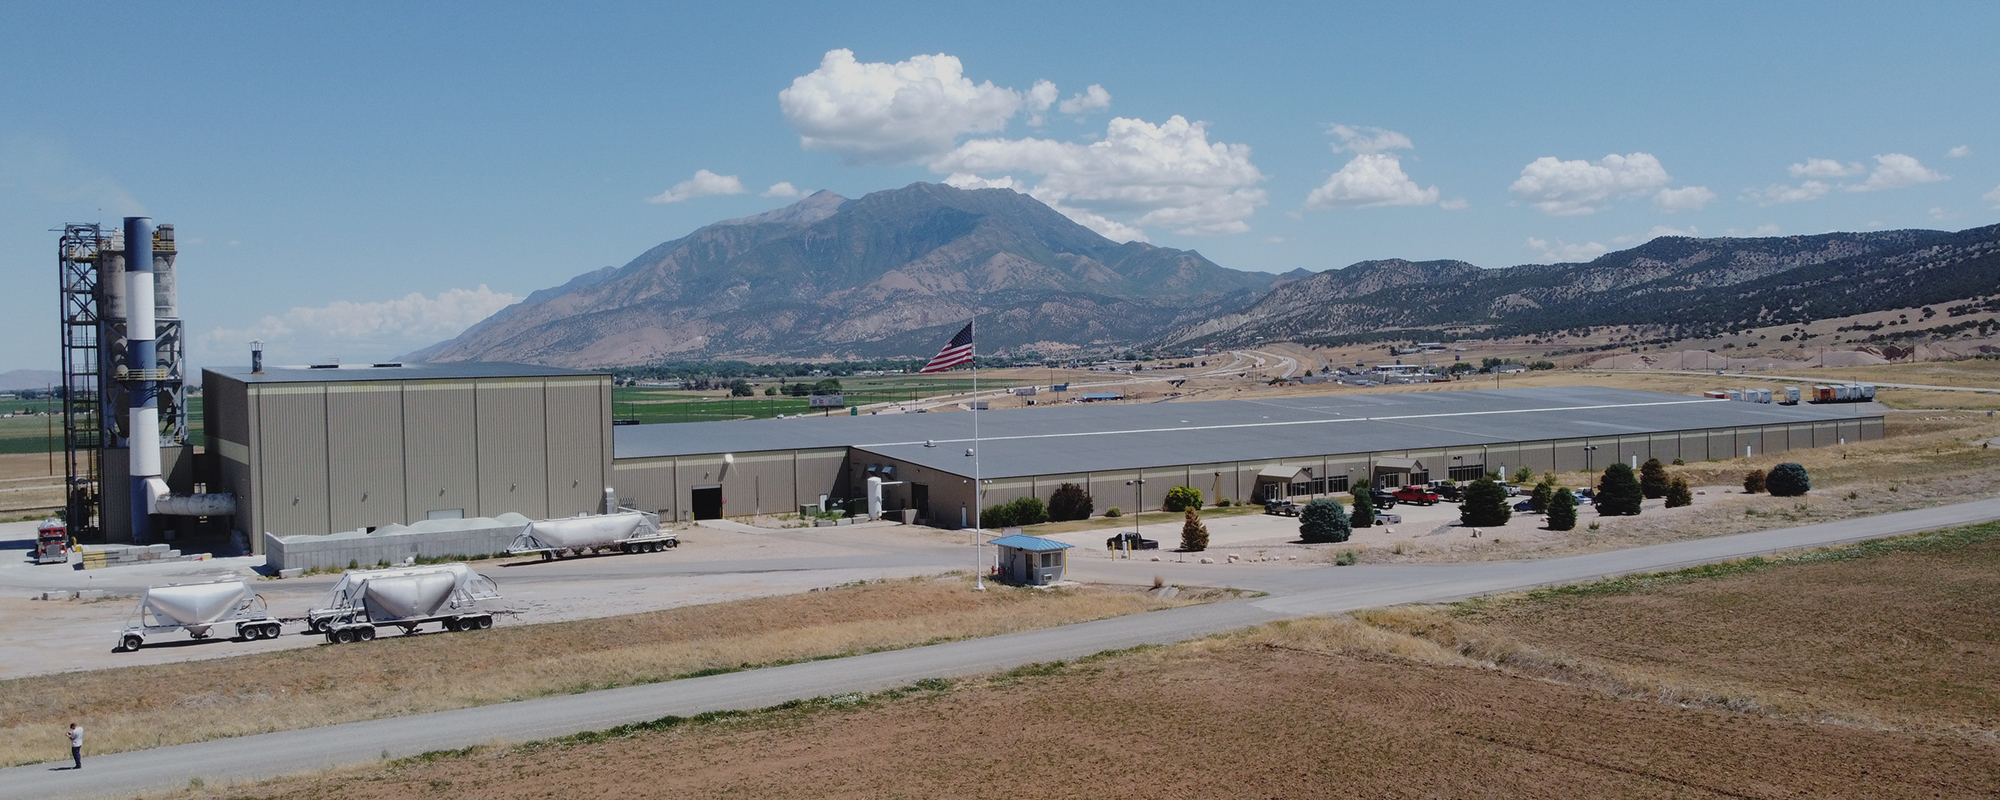 Owens Corning To Expand Production Capability in Utah - Governor's Office  of Economic Opportunity